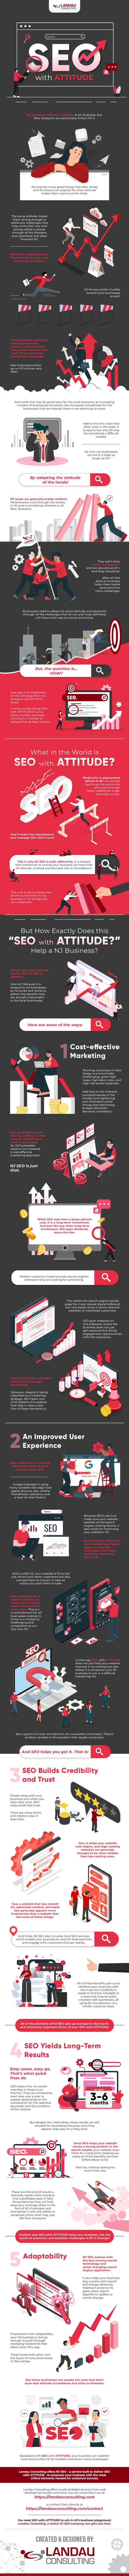 SEO-with-ATTITUDE-infographic-image